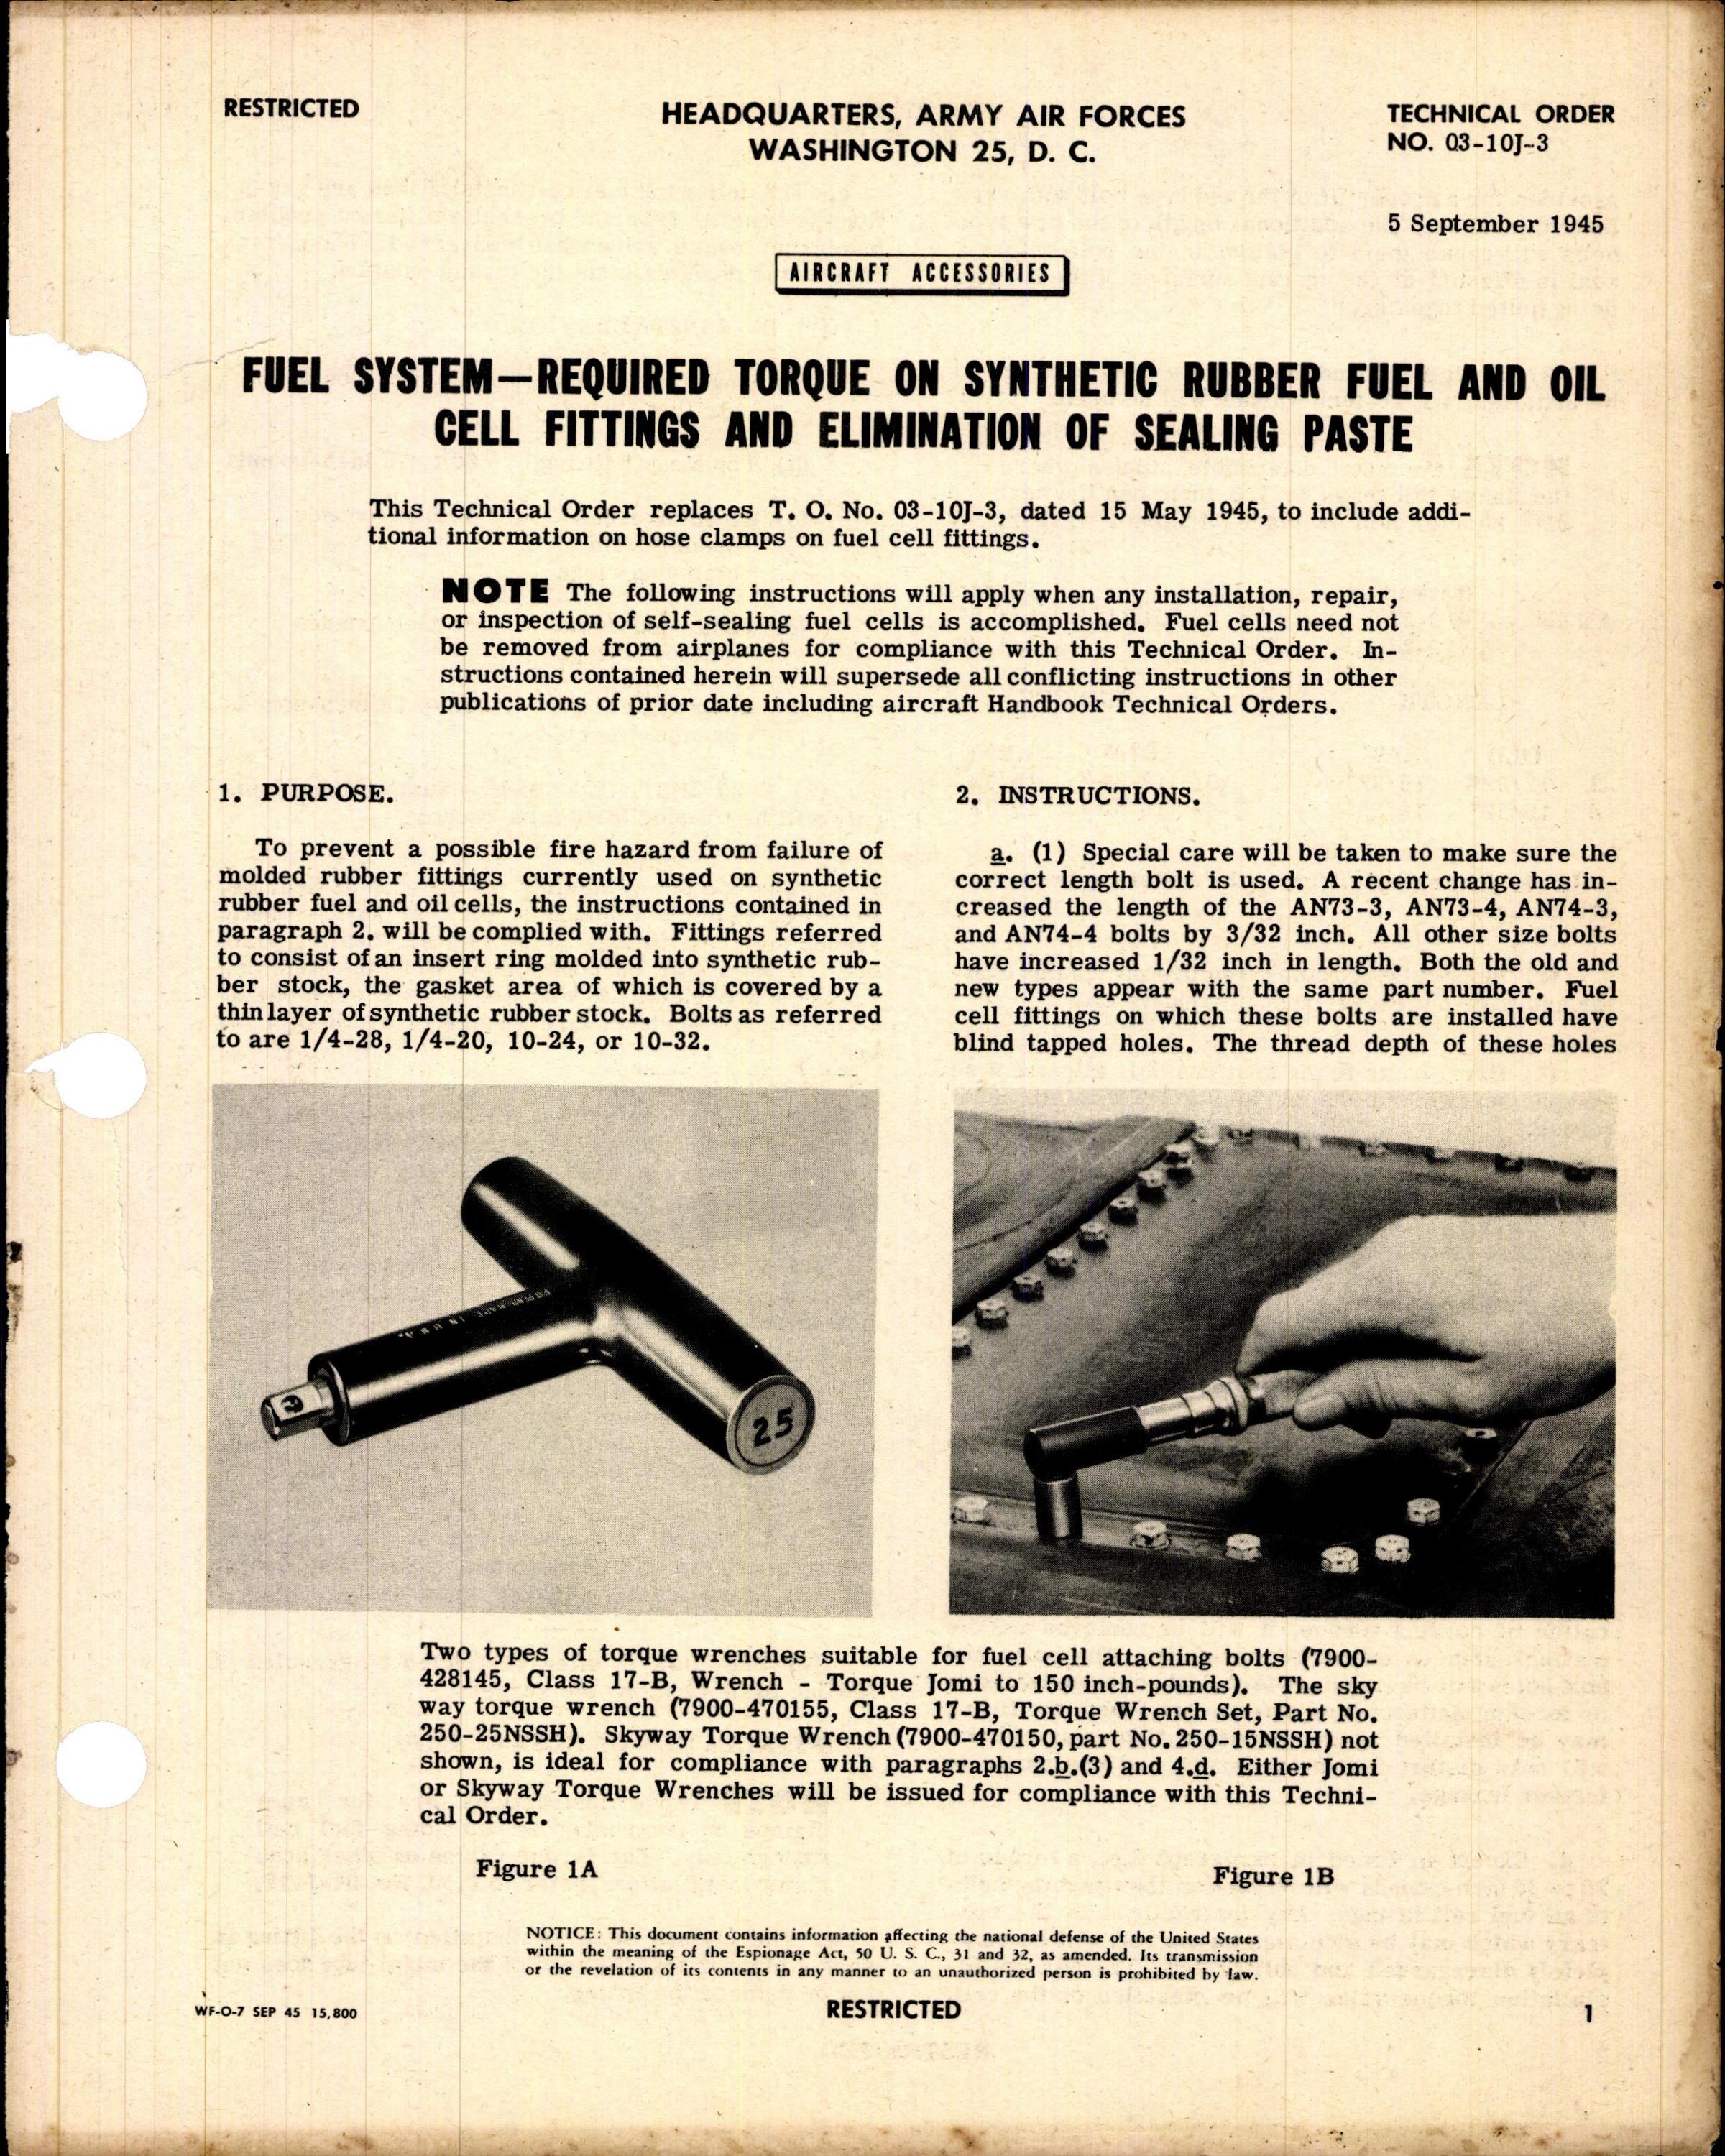 Sample page 1 from AirCorps Library document: Required Torque on Synthetic Rubber Fuel and Oil Cell Fitting and Elimination of Sealing Paste